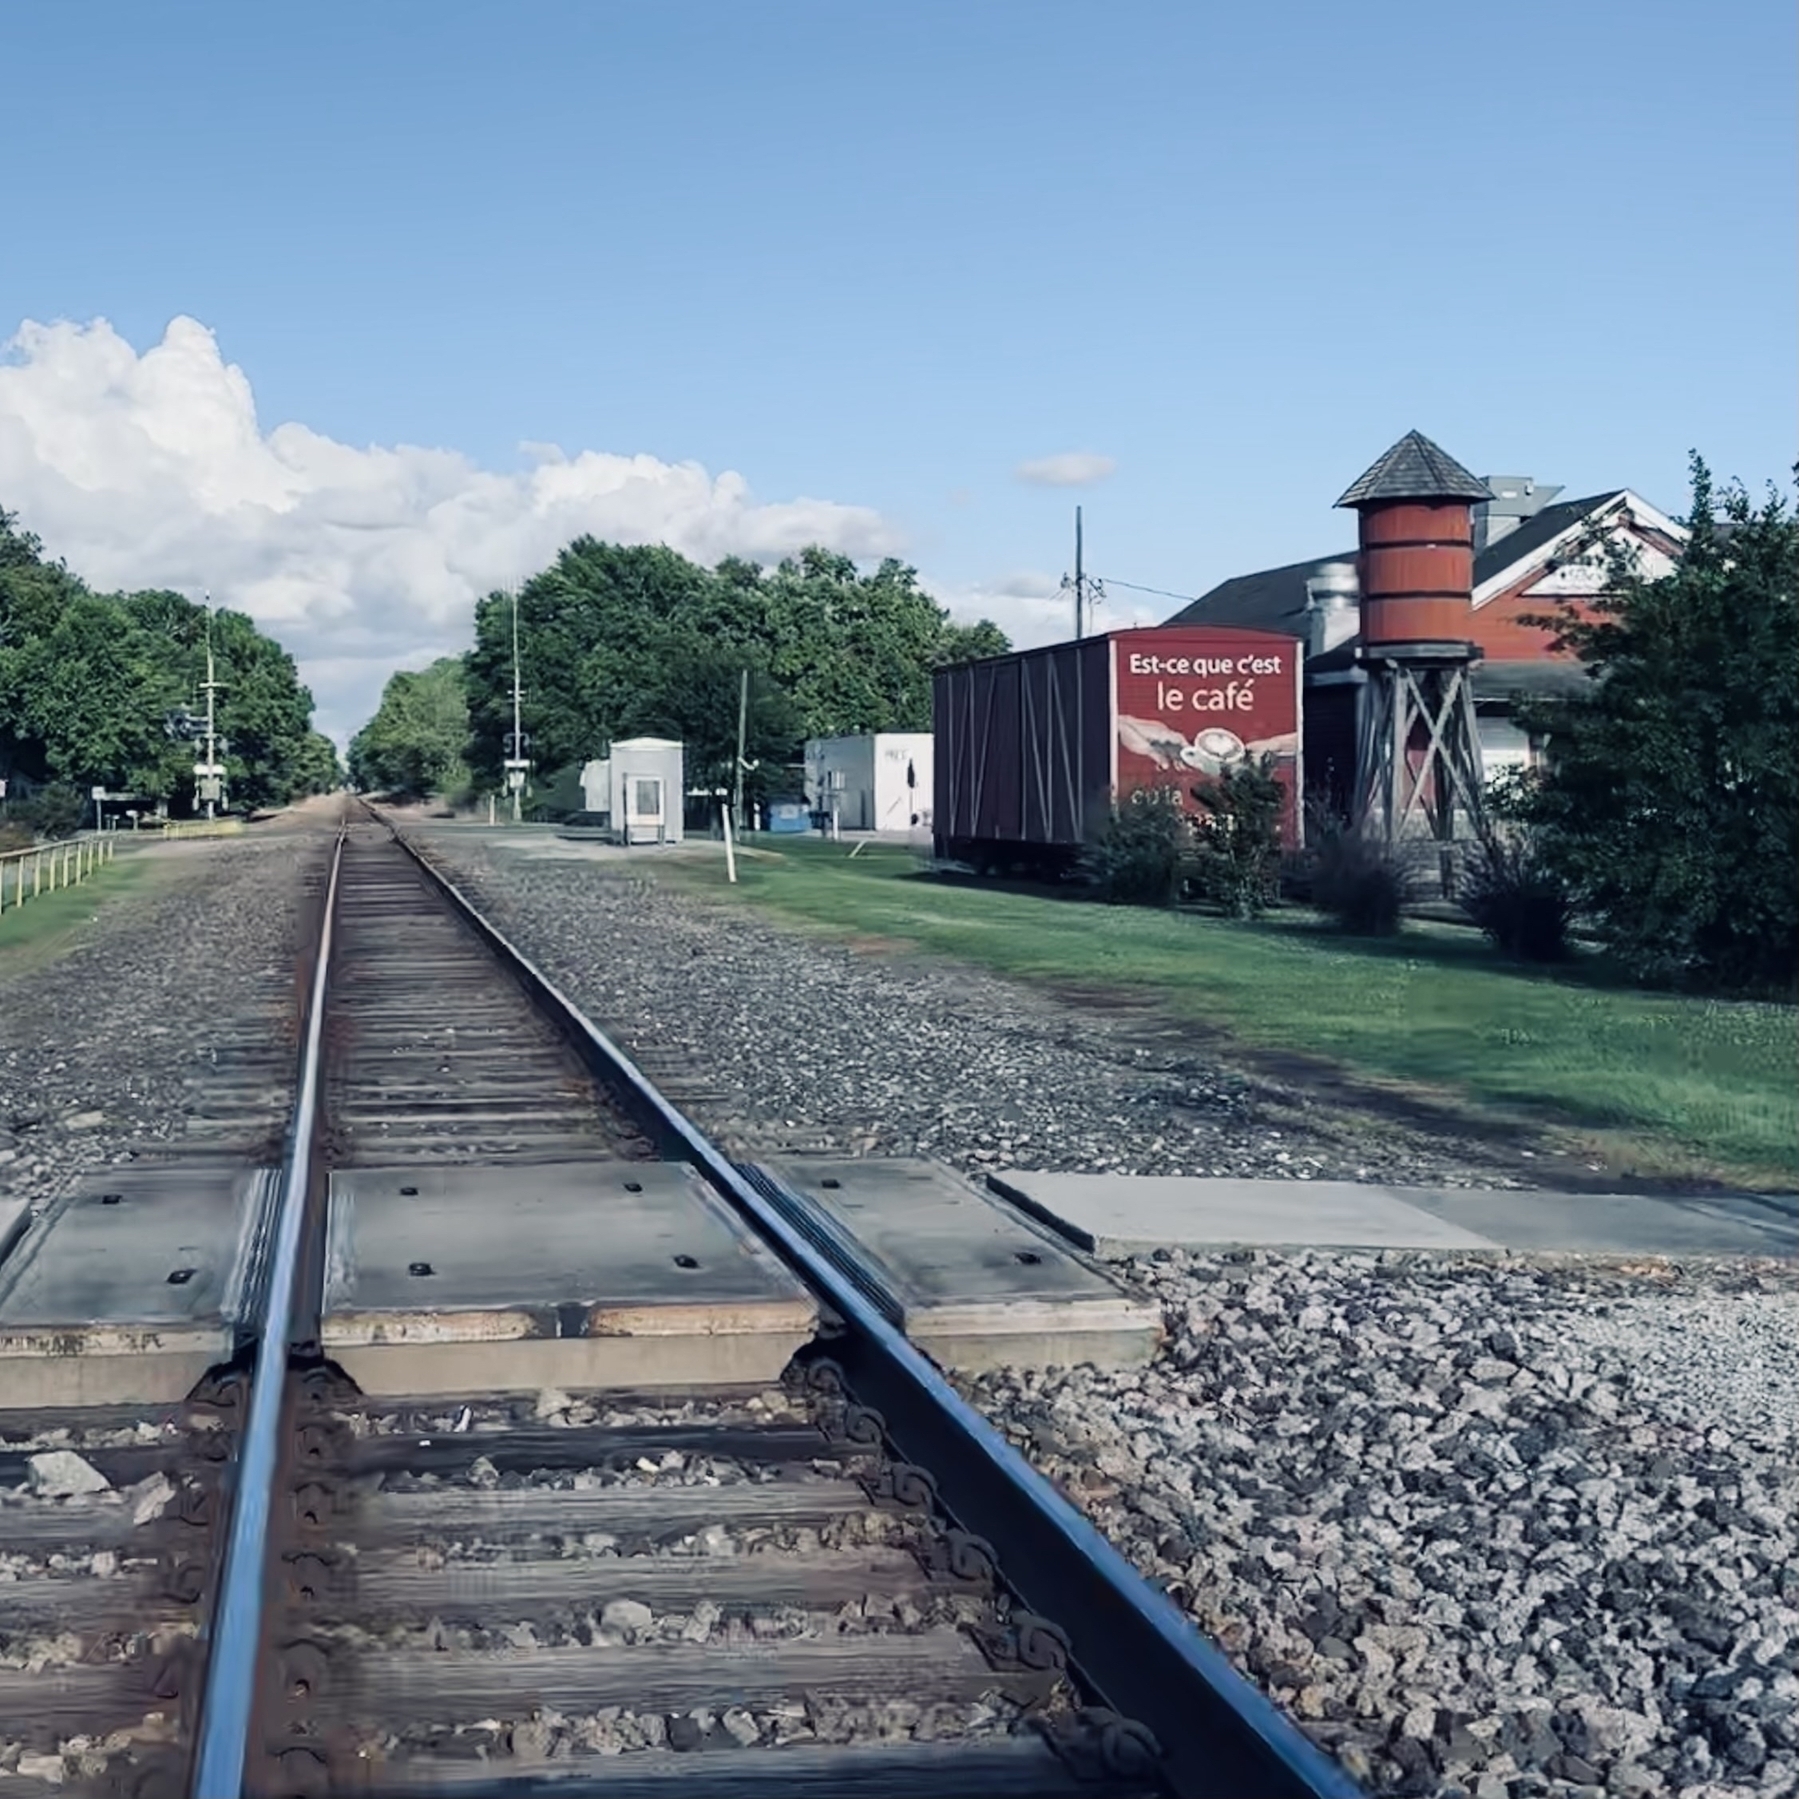 Train tracks with old boxcar and building in background.